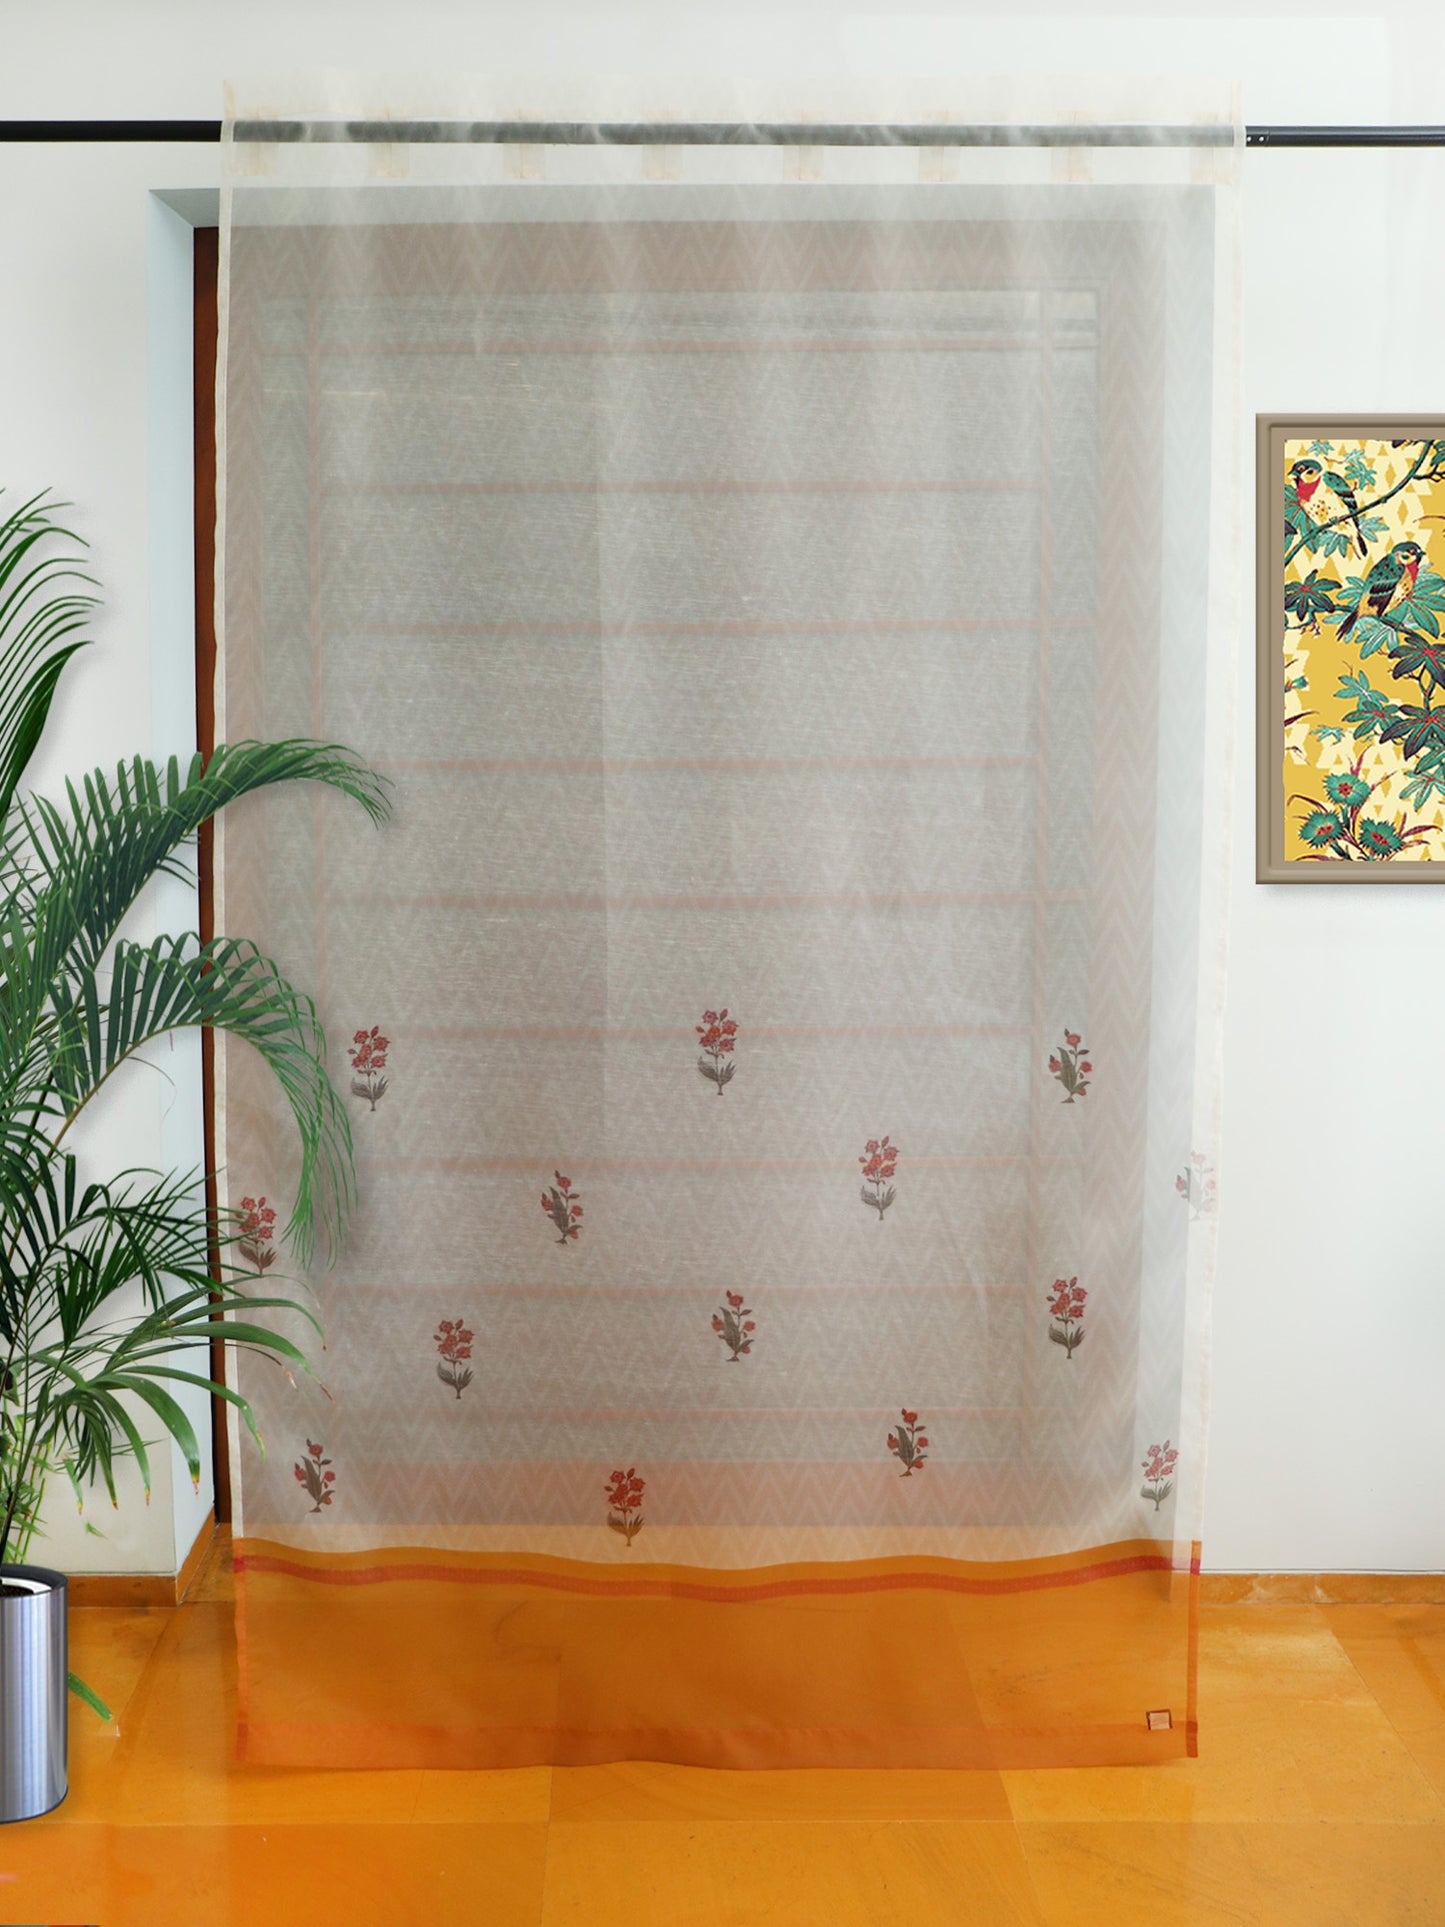 Transparent Organza Sheer Curtain for Door | Bedroom and Living Room | Soft and Light Weight | Floral Printed with Hidden Loop in Multicolor - 50x80 inches (7feet Long) (Pack of 1)